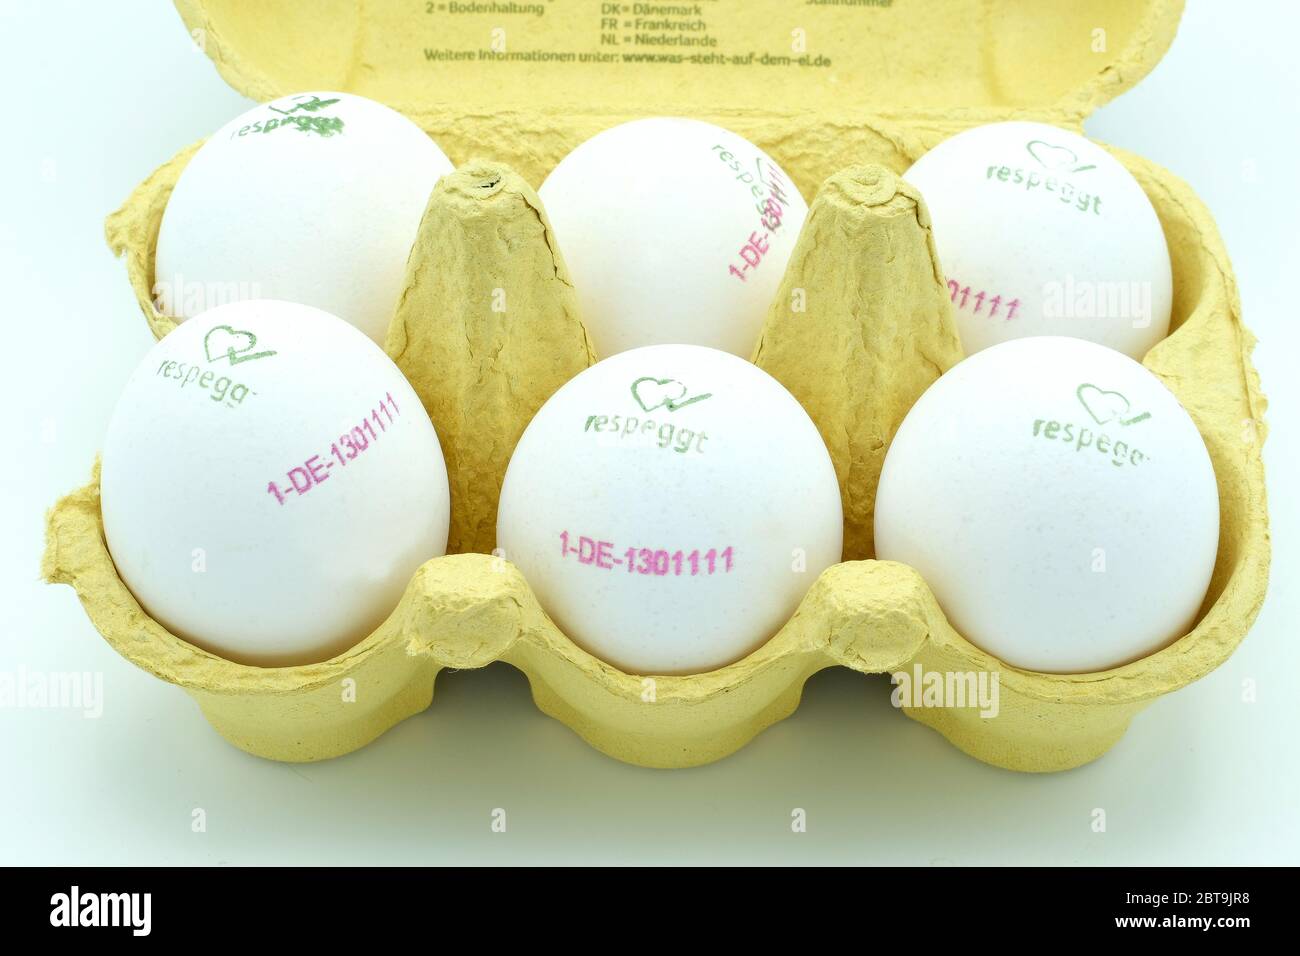 Close-up of an egg-box full of half a dozen white free-range eggs marked respeggt Stock Photo